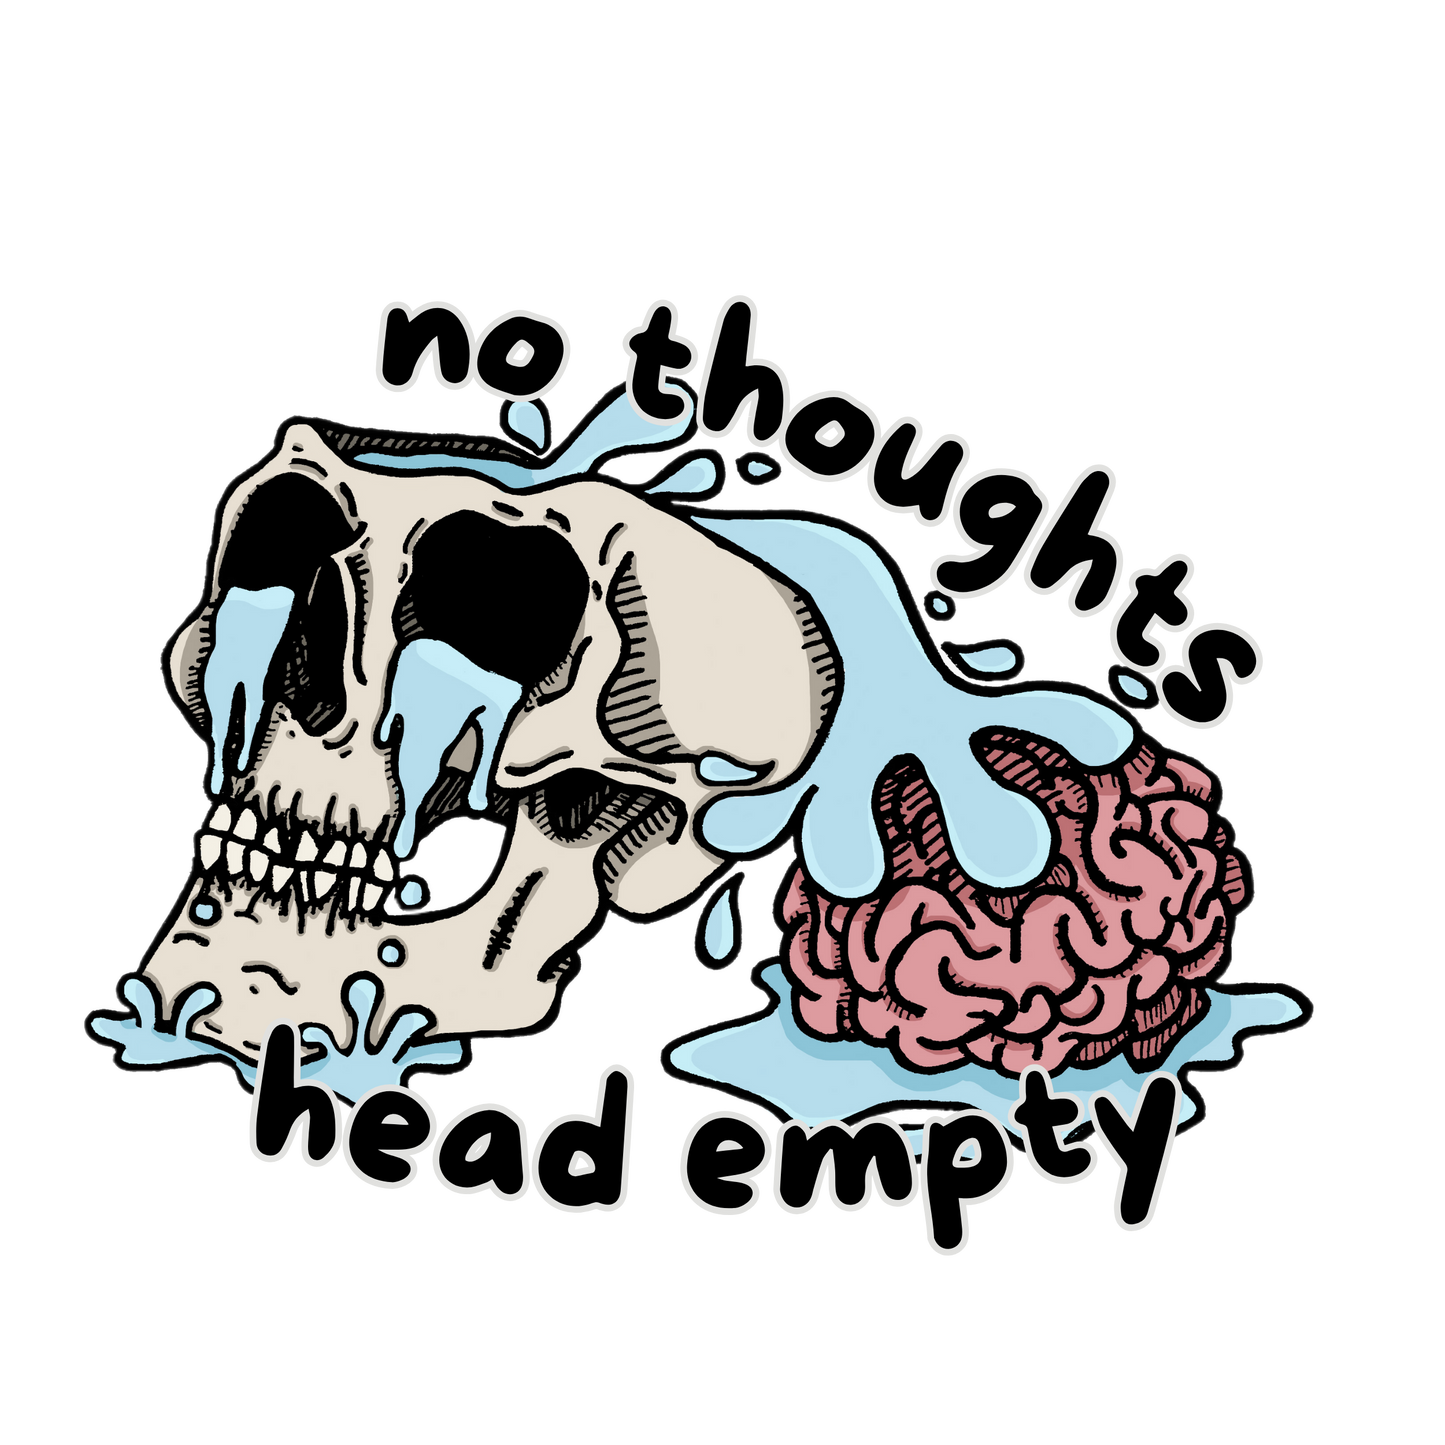 no thoughts head empty graphic design - gaslit apparel